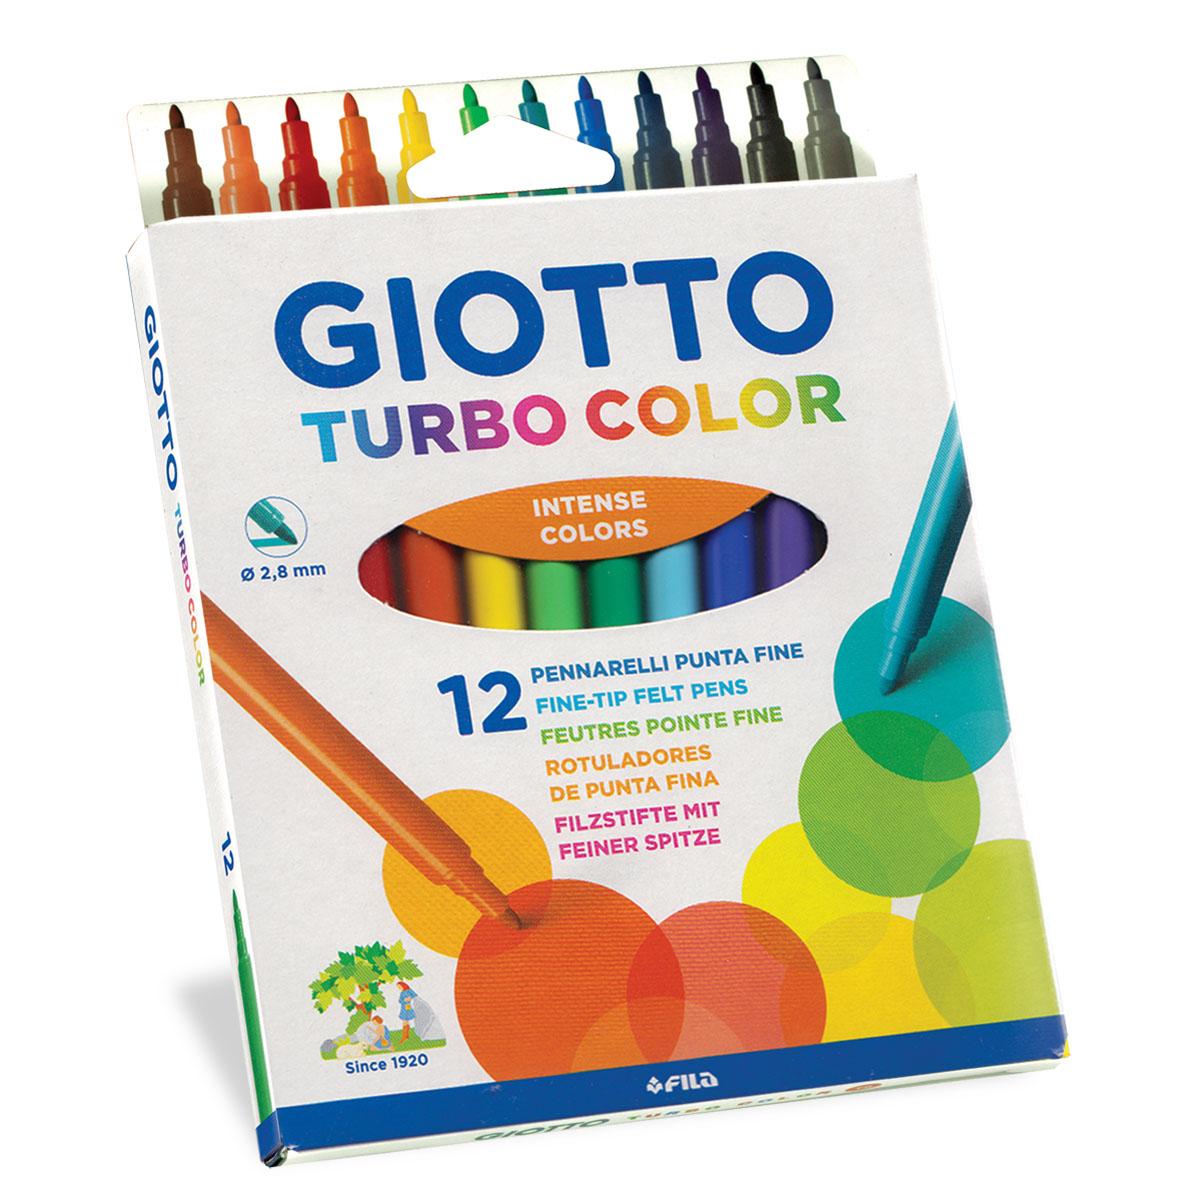 Selected image for GIOTTO Flomaster 12/1 Turbo color blister 071400